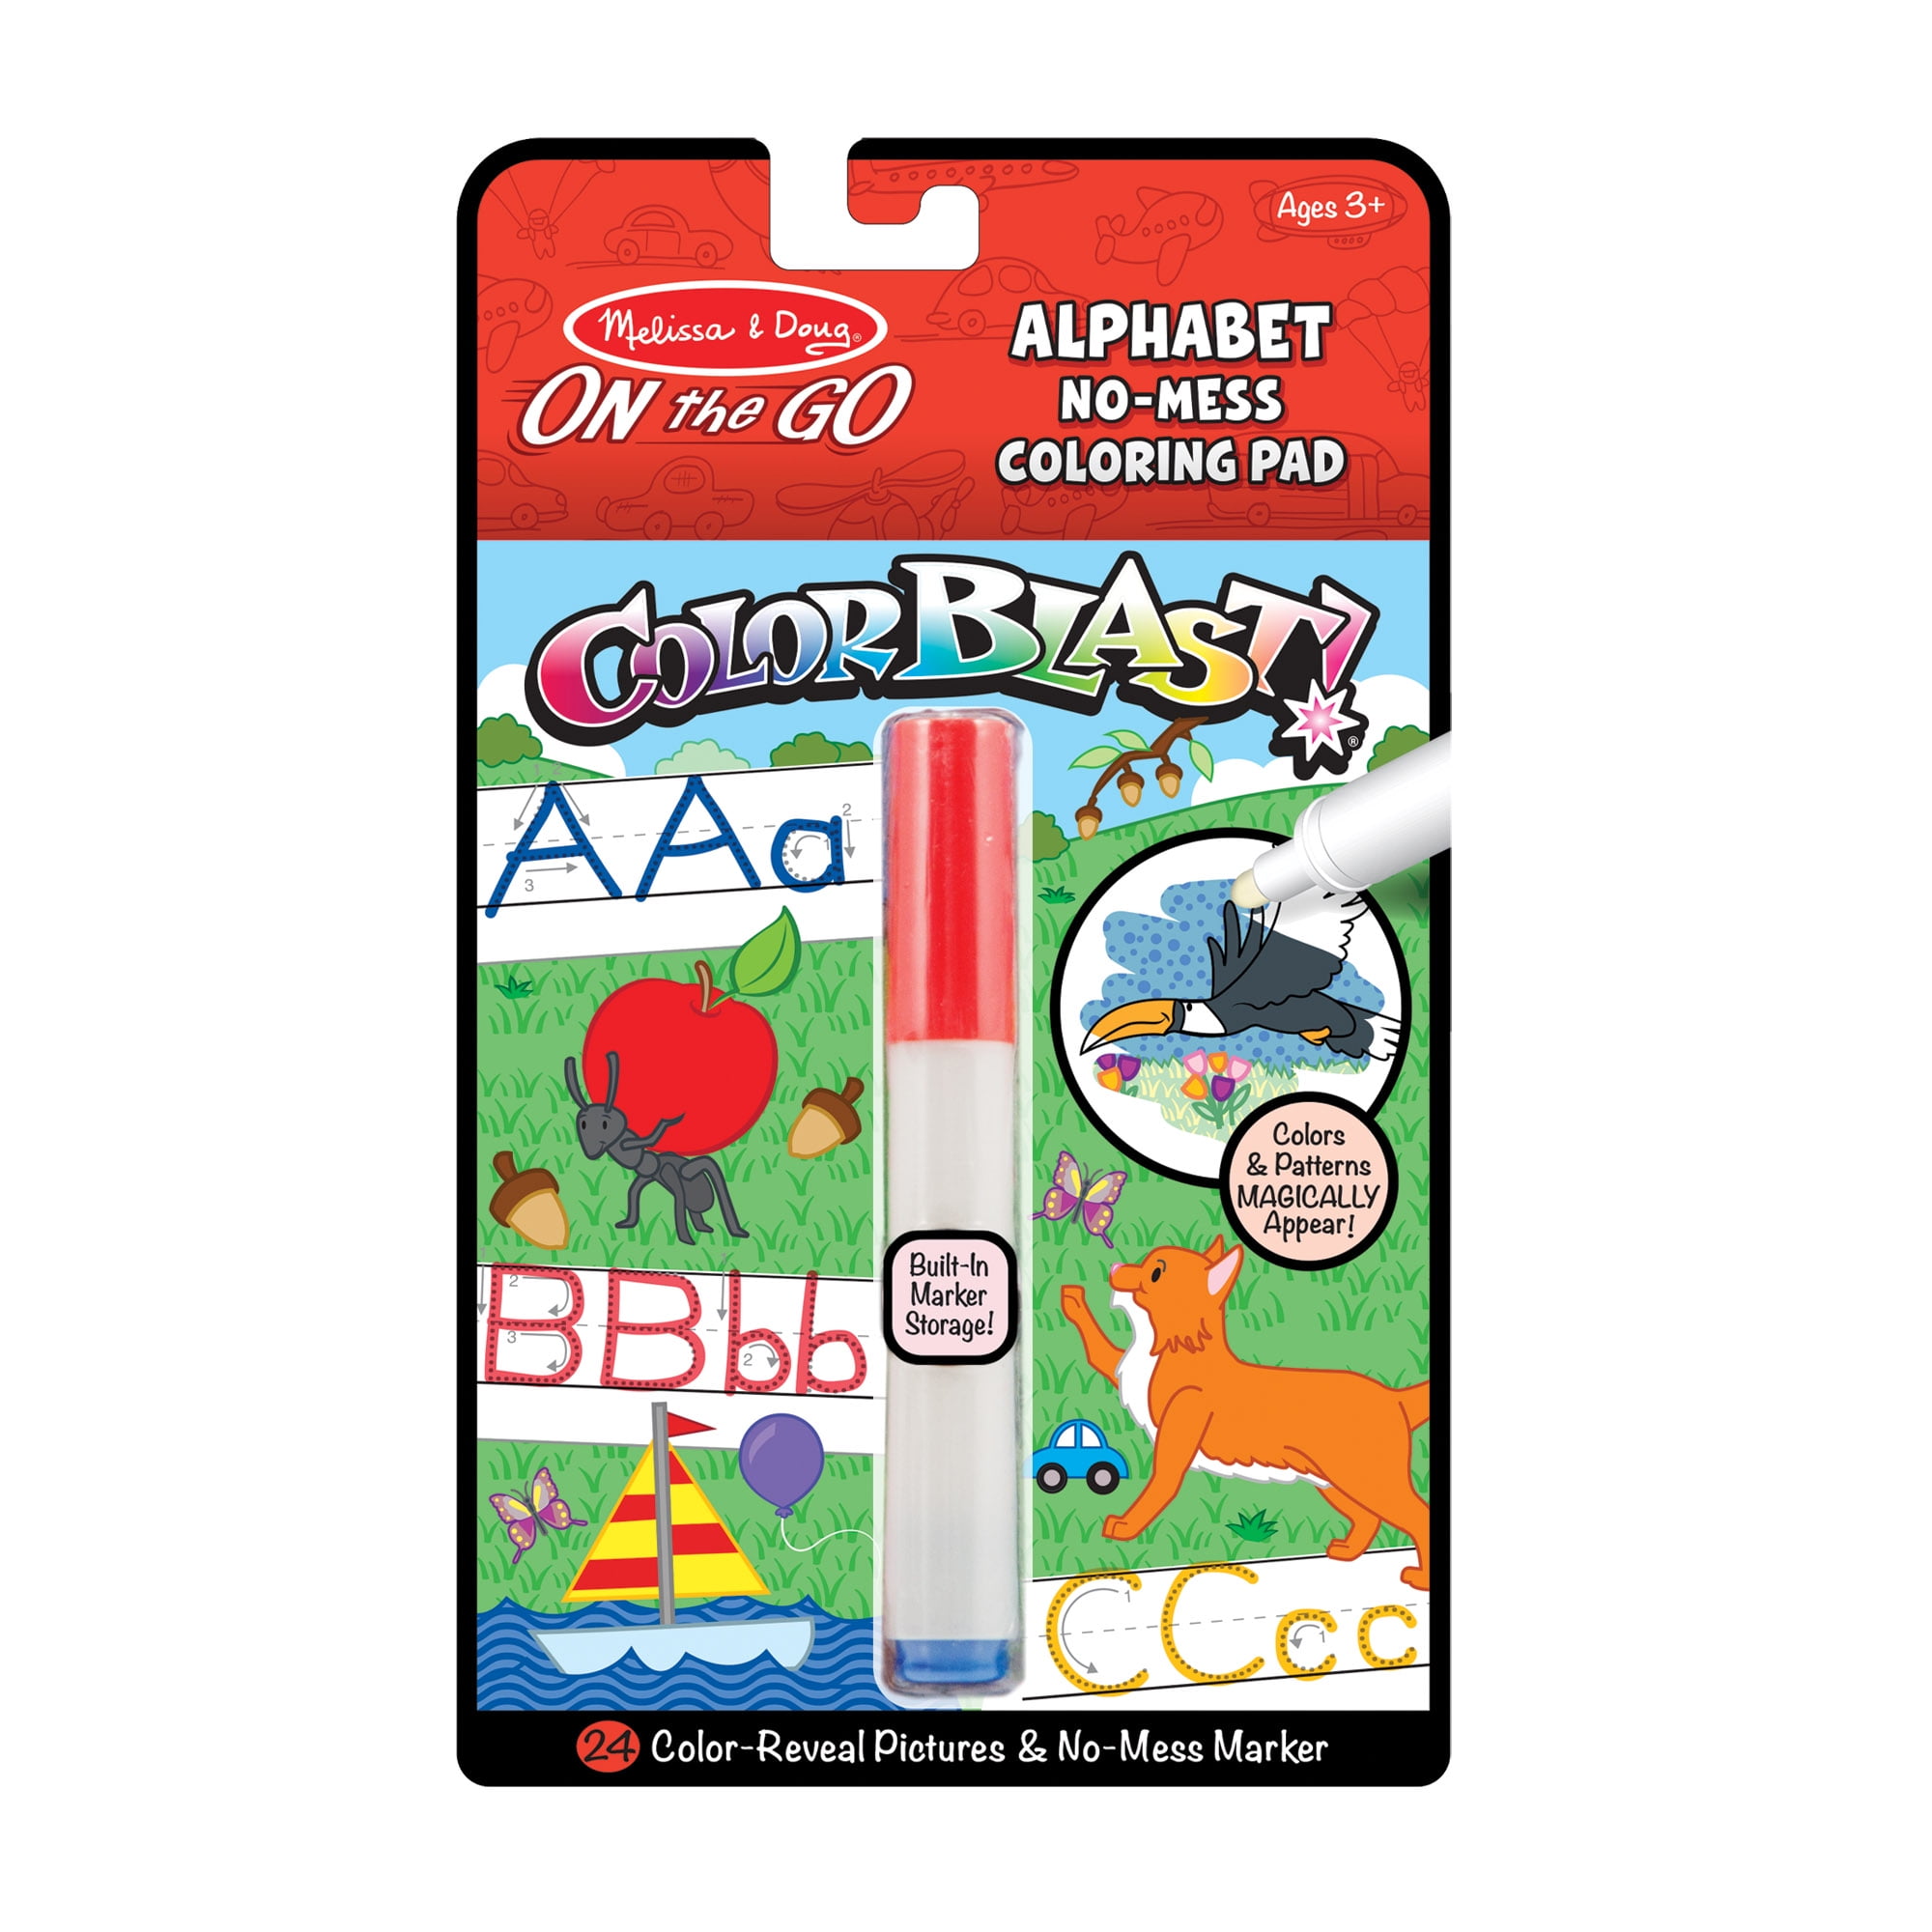 Crayola Alphabet & Number Pad, Tracing Worksheets, 30 Pages